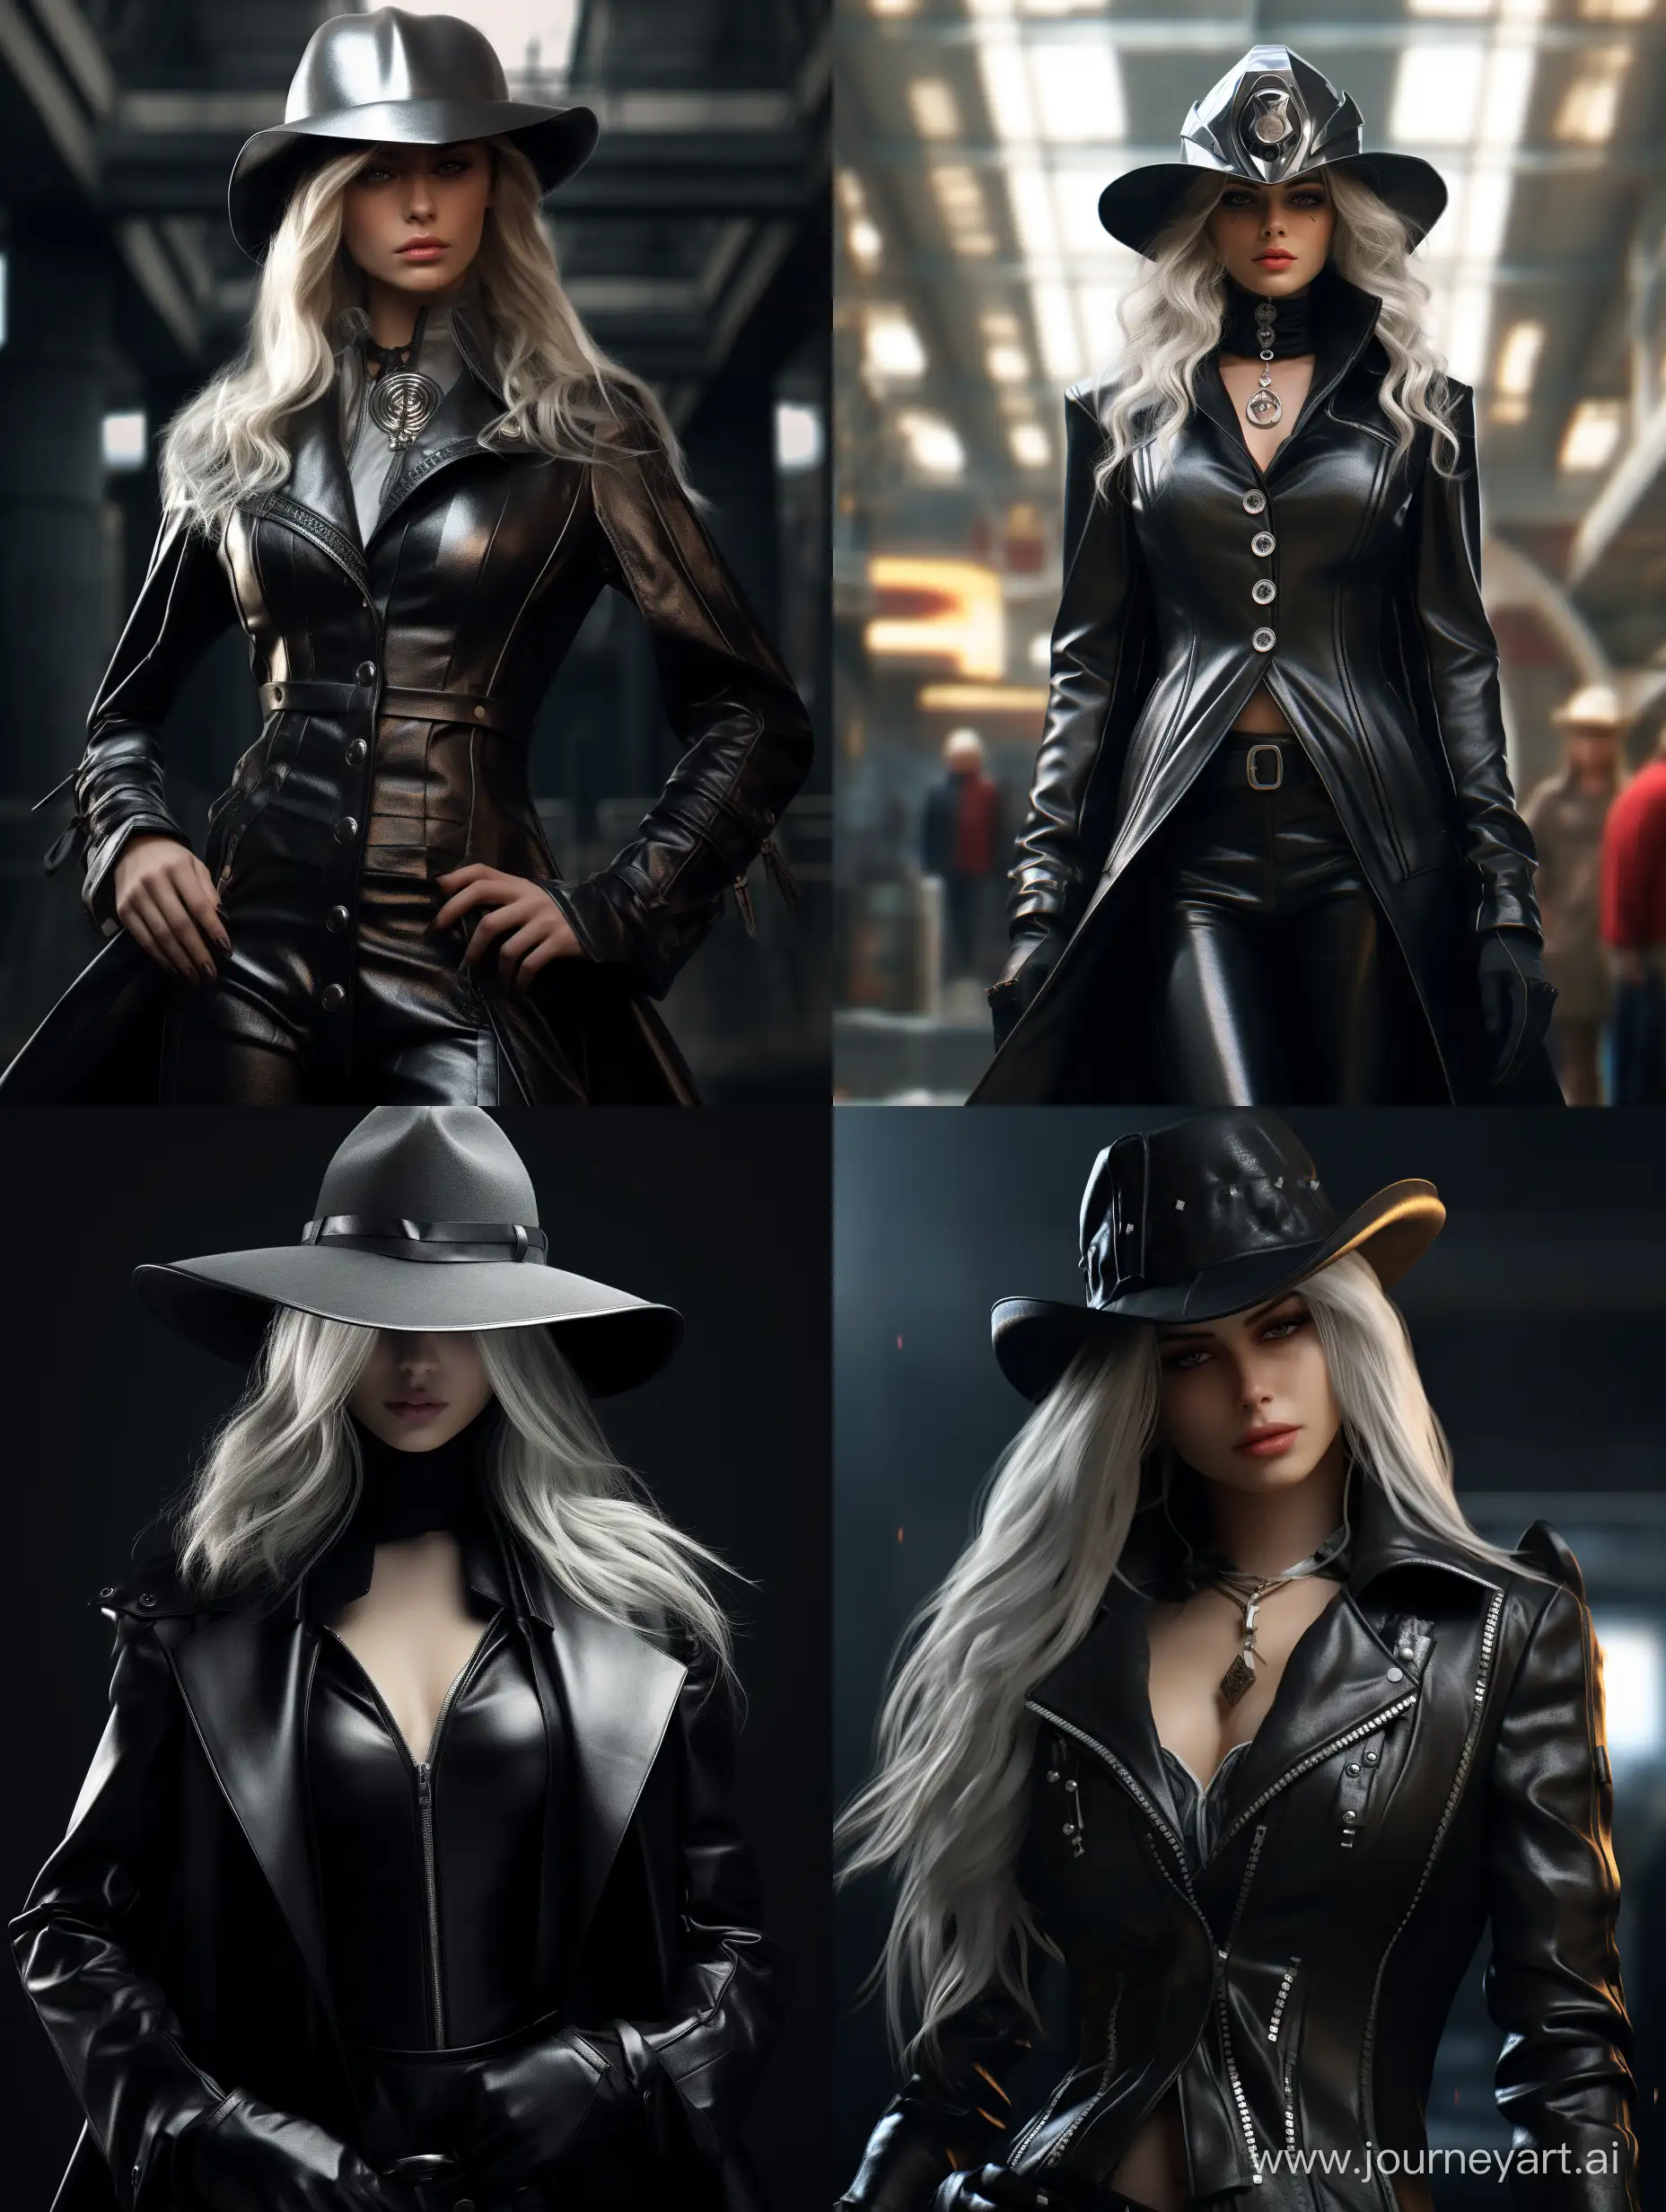 Stylish-Iron-Girl-in-Black-Coat-and-Hat-with-Epic-Realism-in-8K